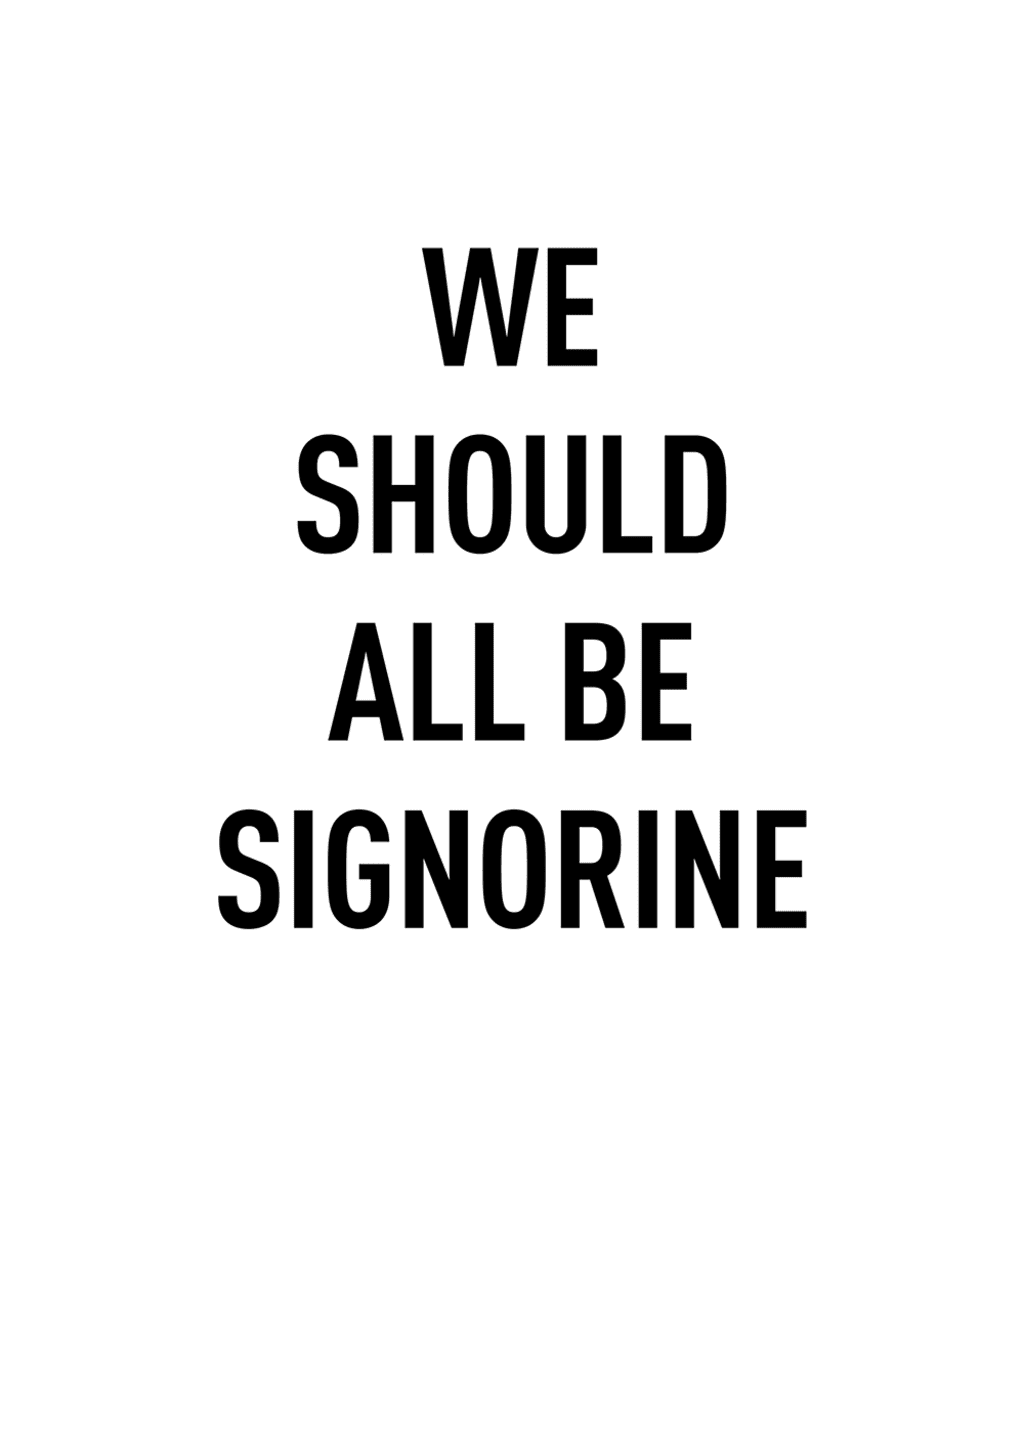 We all should be signorine